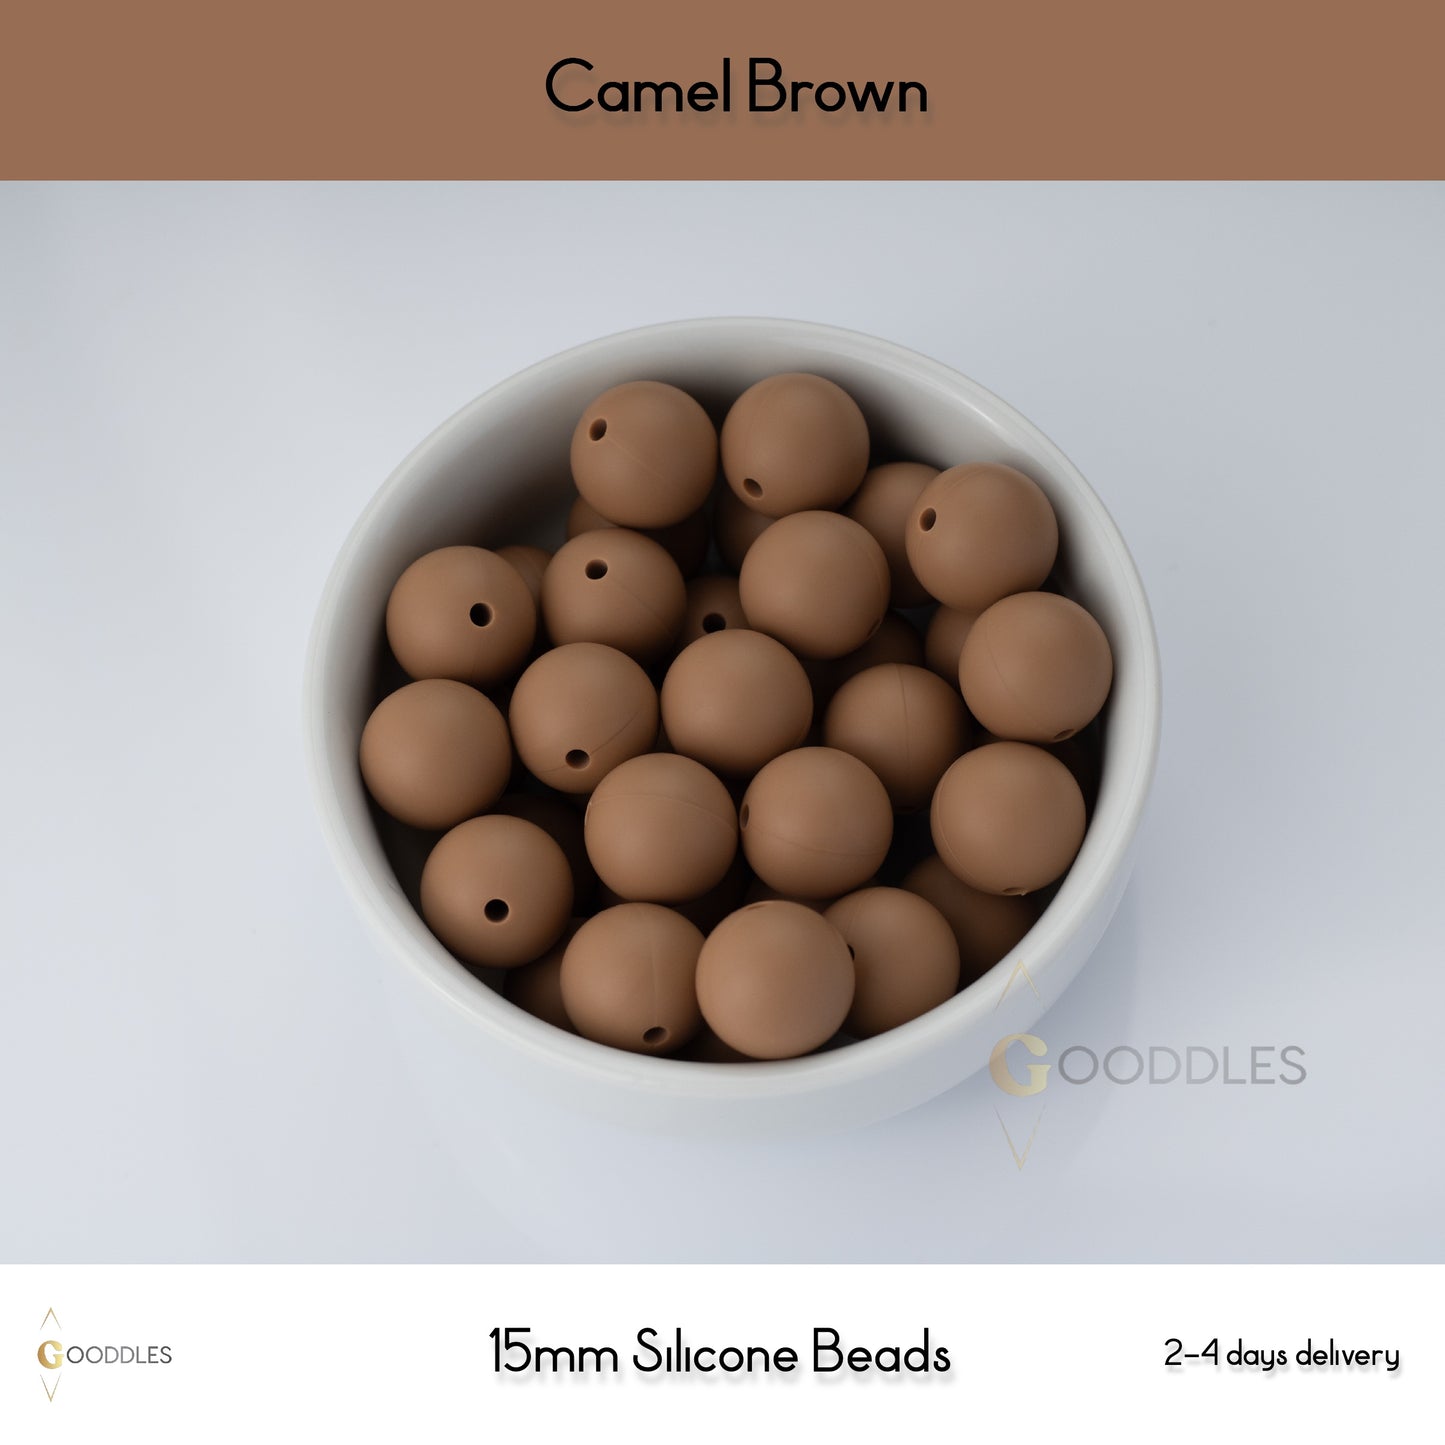 5pcs, Camel Brown Silicone Beads Round Silicone Beads